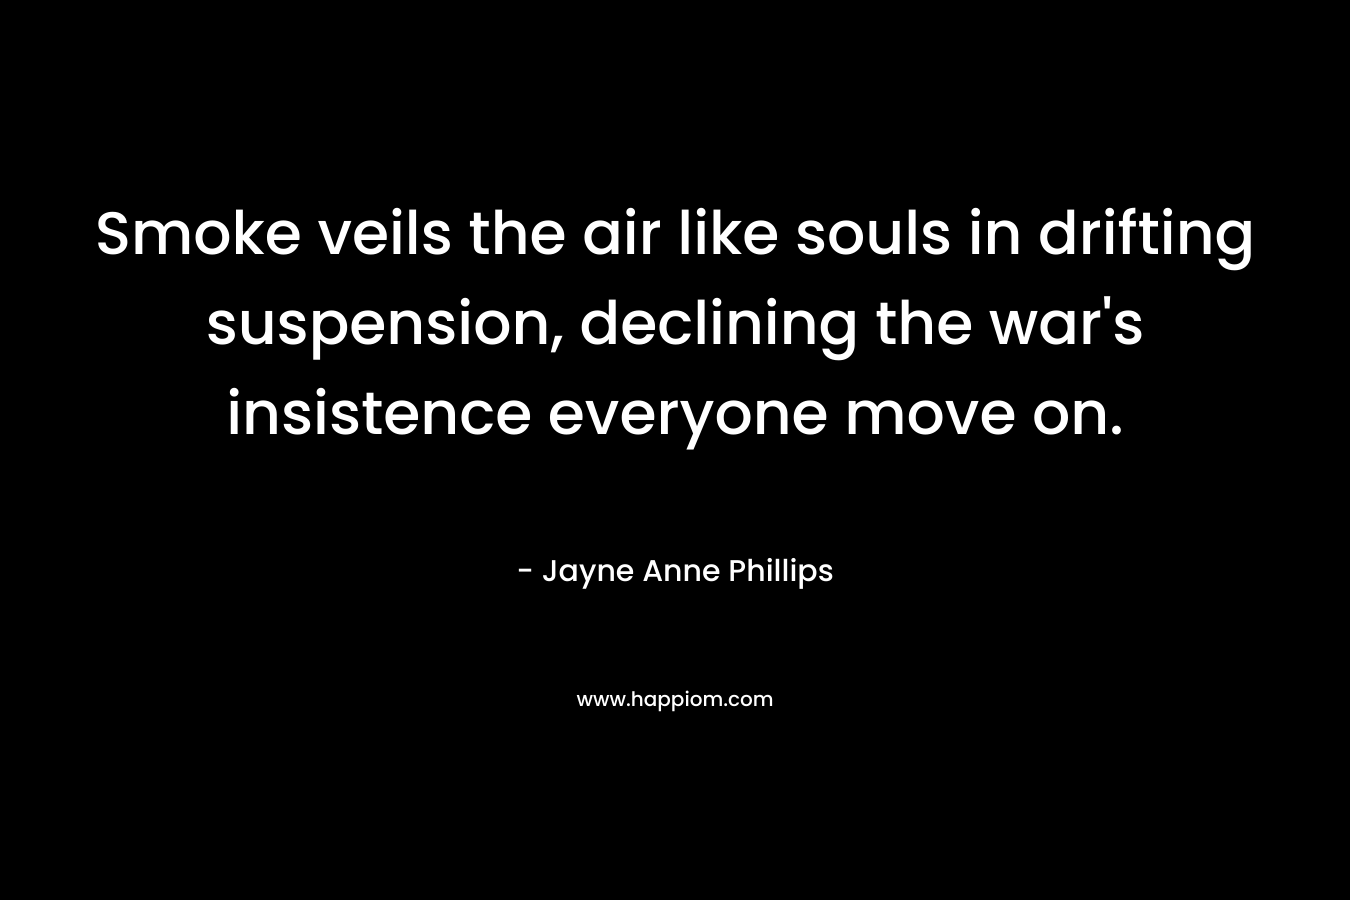 Smoke veils the air like souls in drifting suspension, declining the war’s insistence everyone move on. – Jayne Anne Phillips